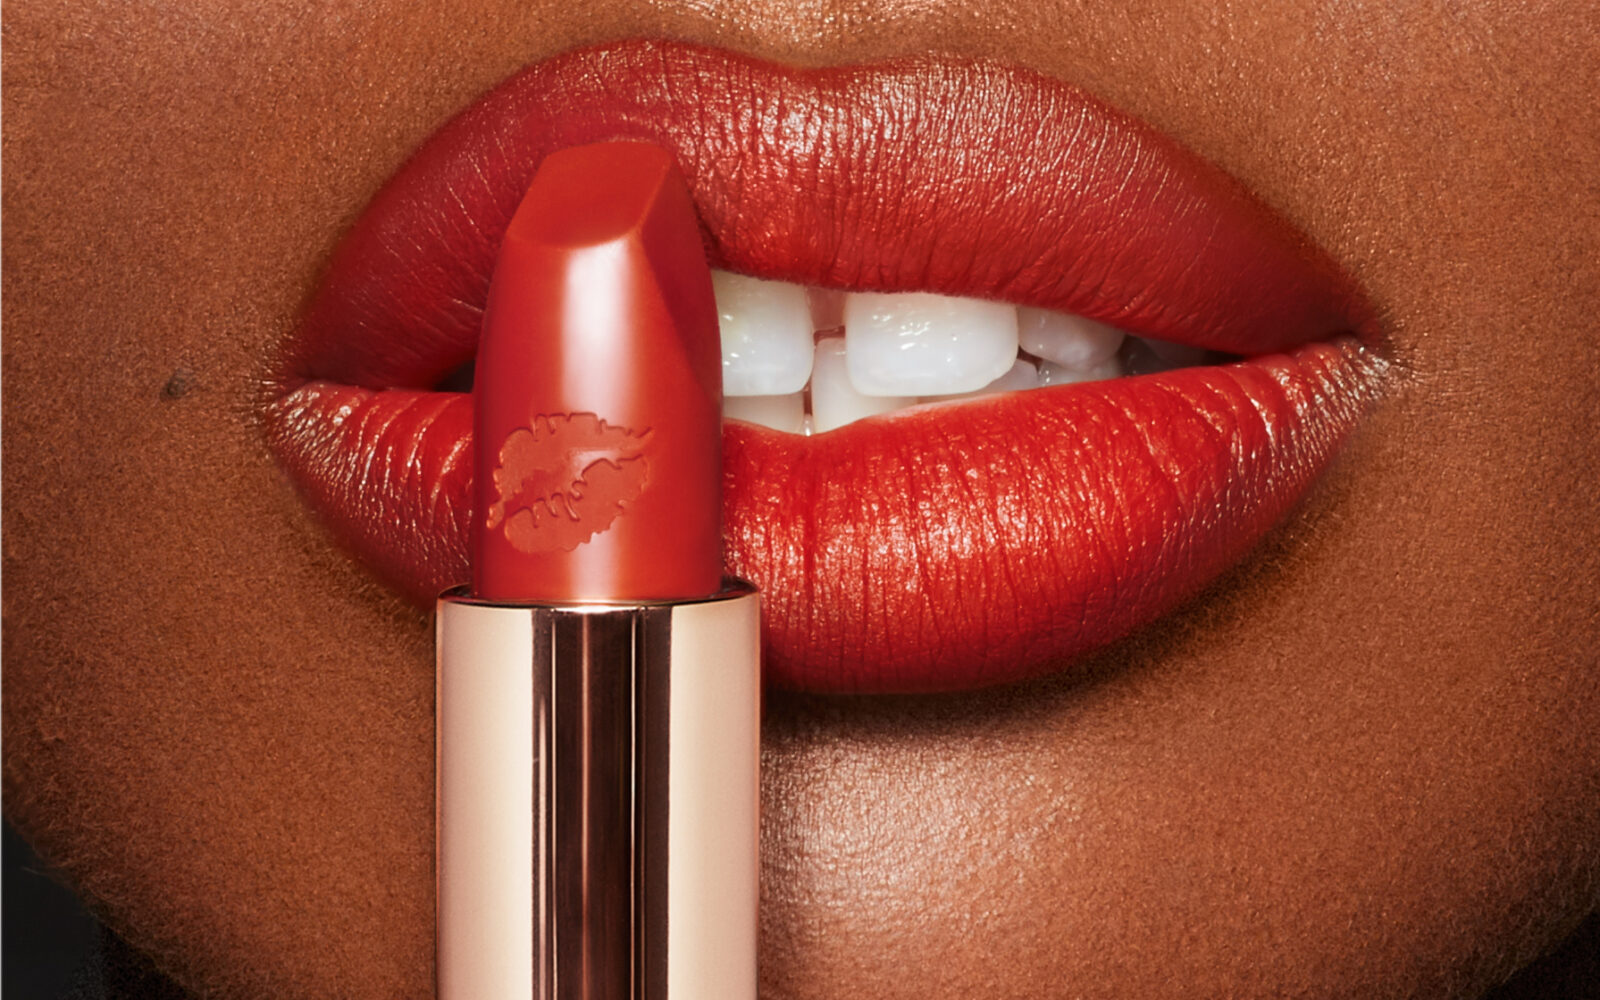 Charlotte Tilbury - Hot Lips 2 - new collection launch